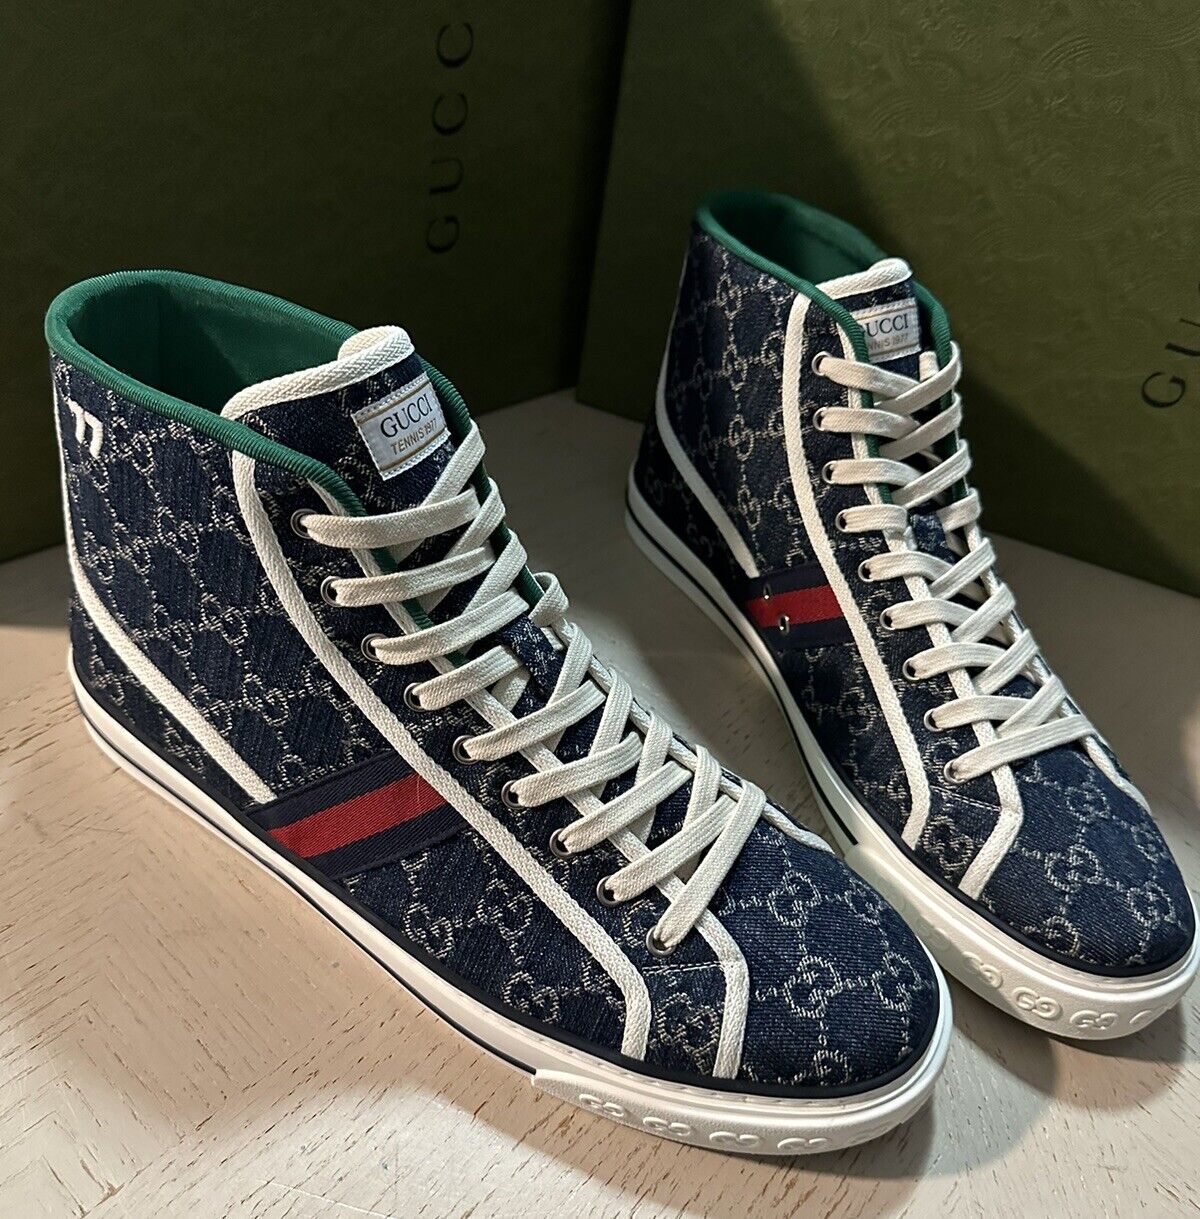 New Gucci Men GG Logo Canvas High-top Sneakers Blue 13 US/12.5 UK 625807